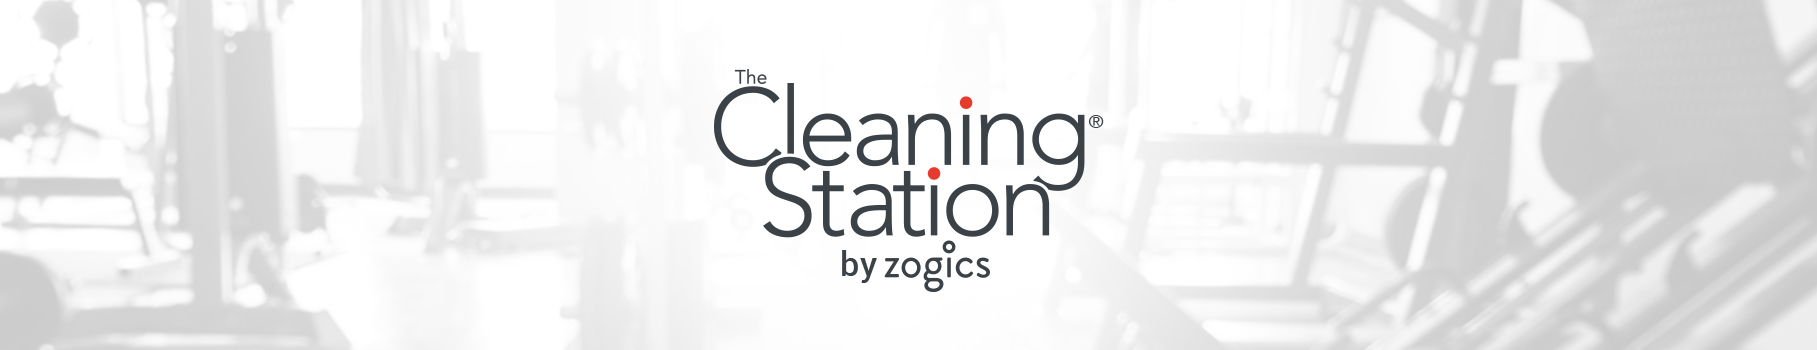 The Cleaning Station by Zogics